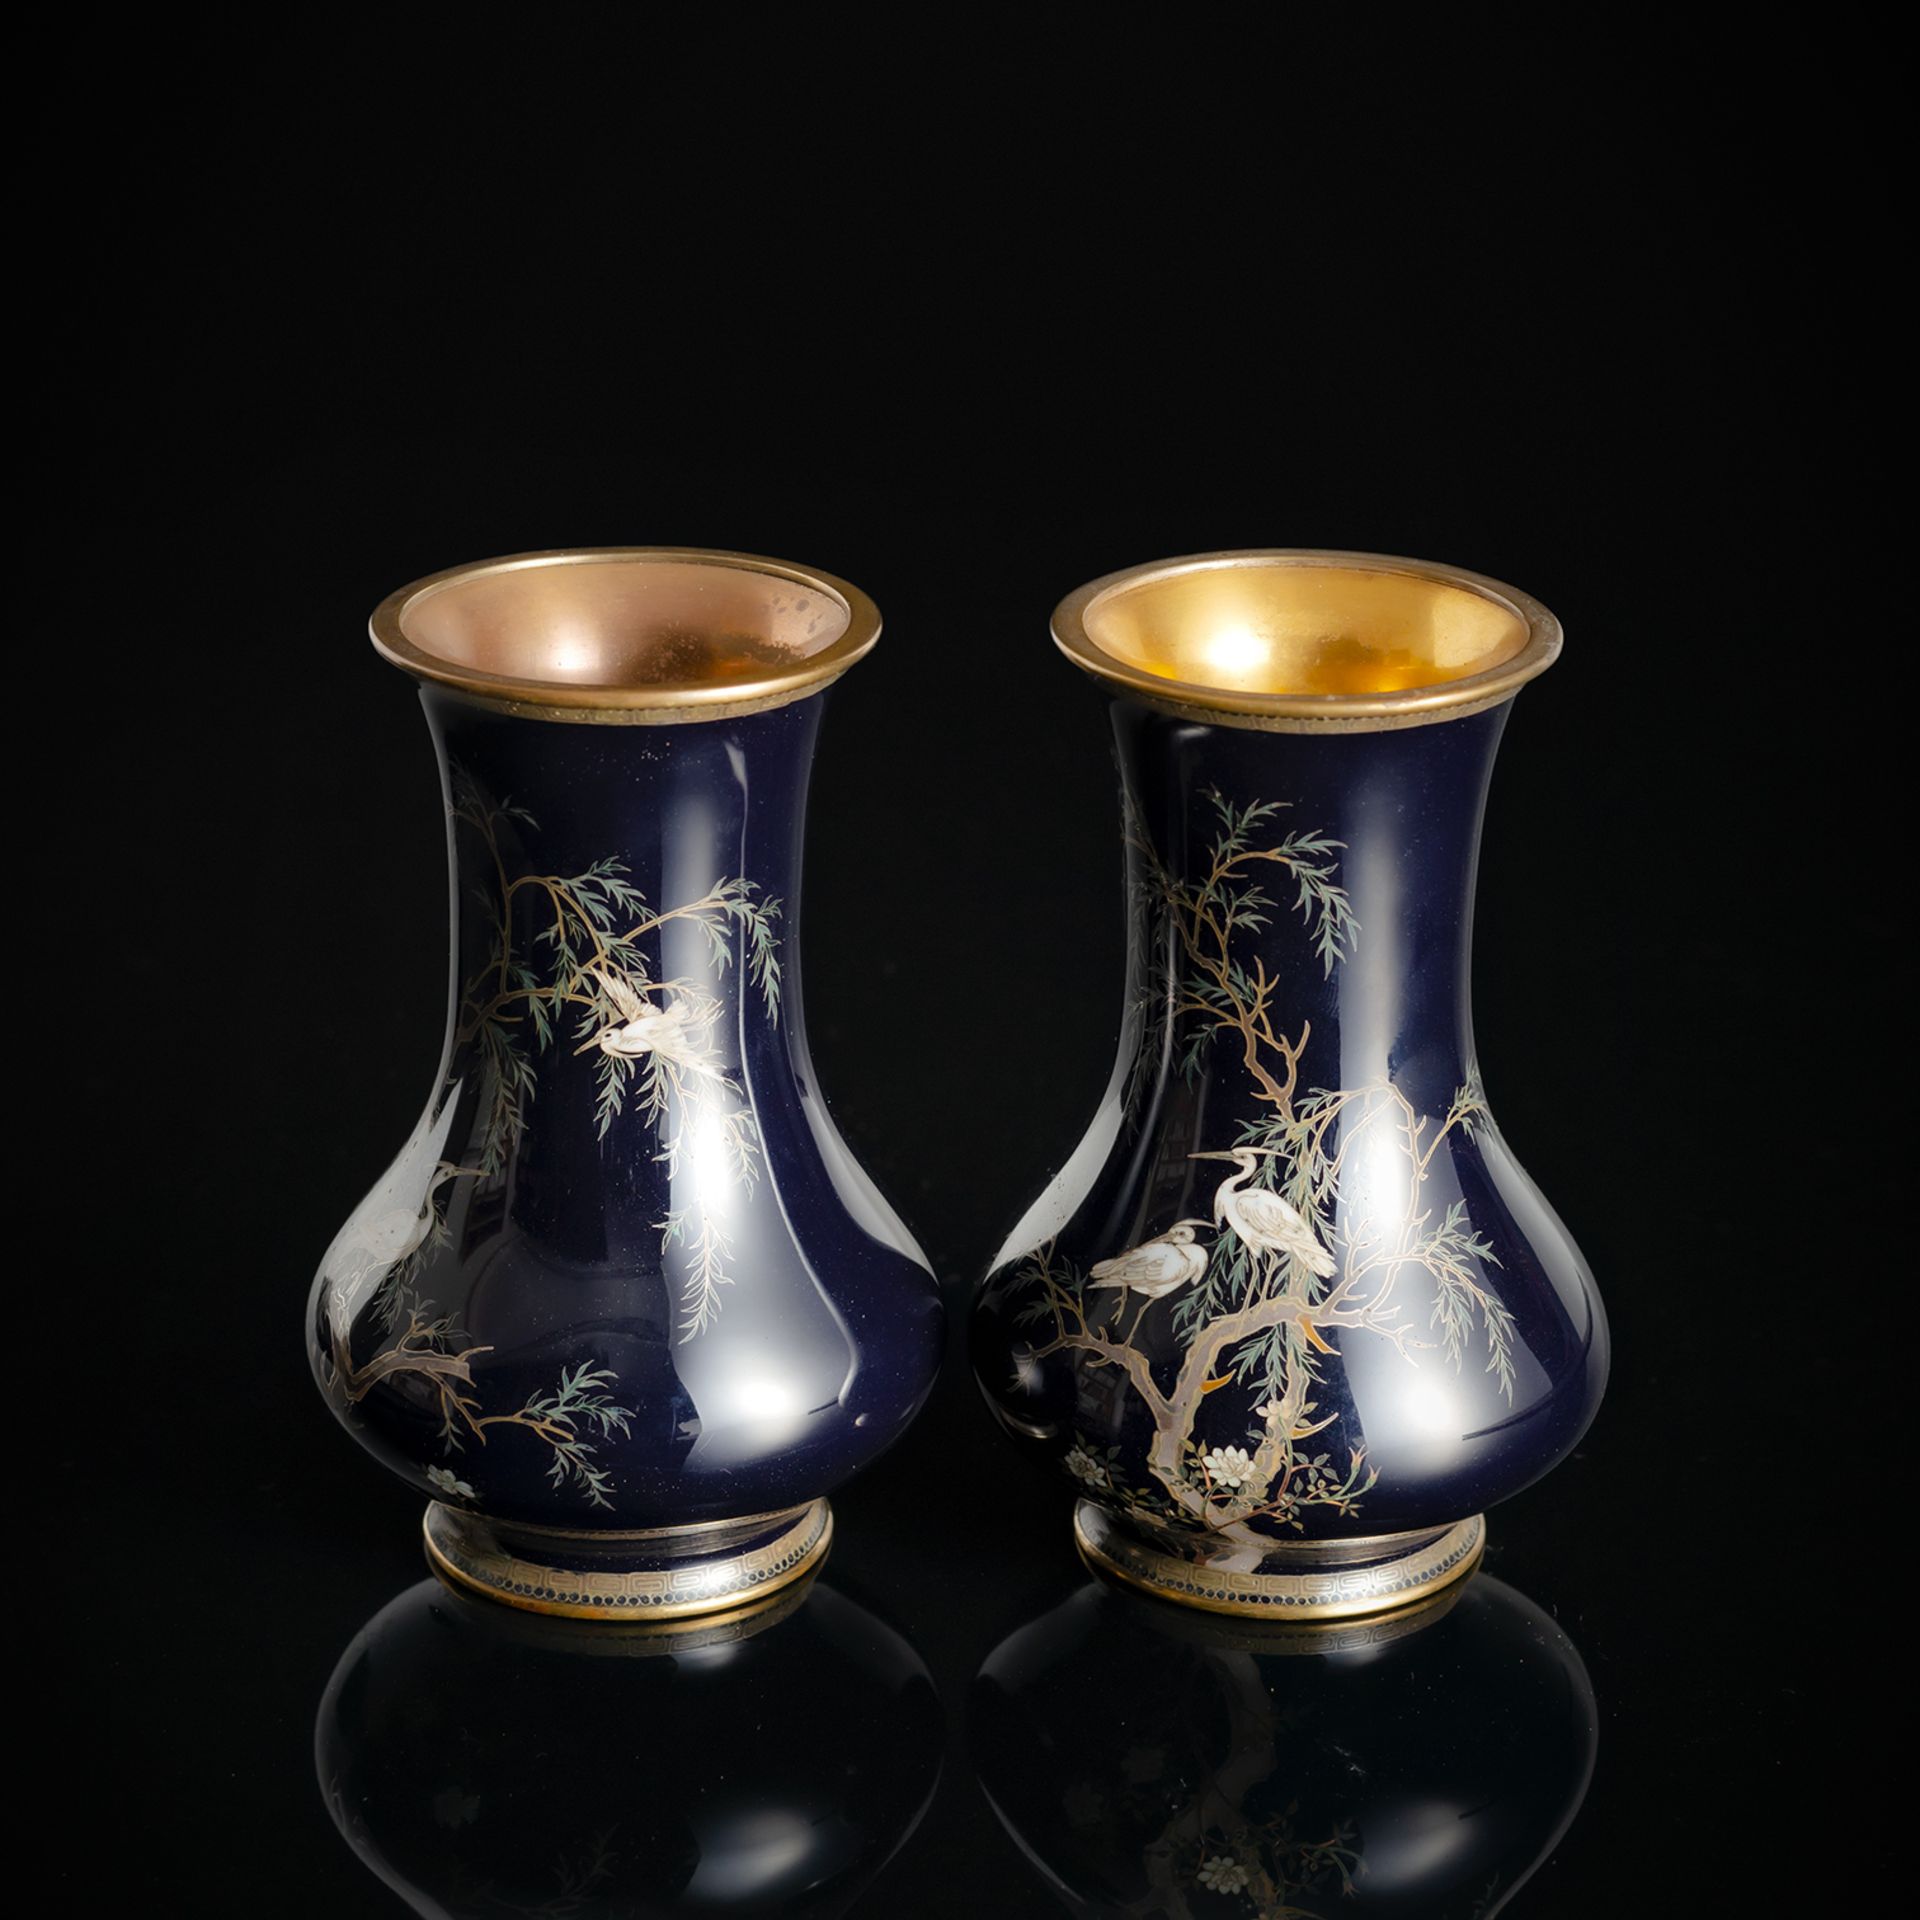 A FINE PAIR OF CLOISONNÉ ENAMEL VASES WITH BRIDS AND WILLOW TREES NEAR FLOWERS ON DARK-BLUE GROUND